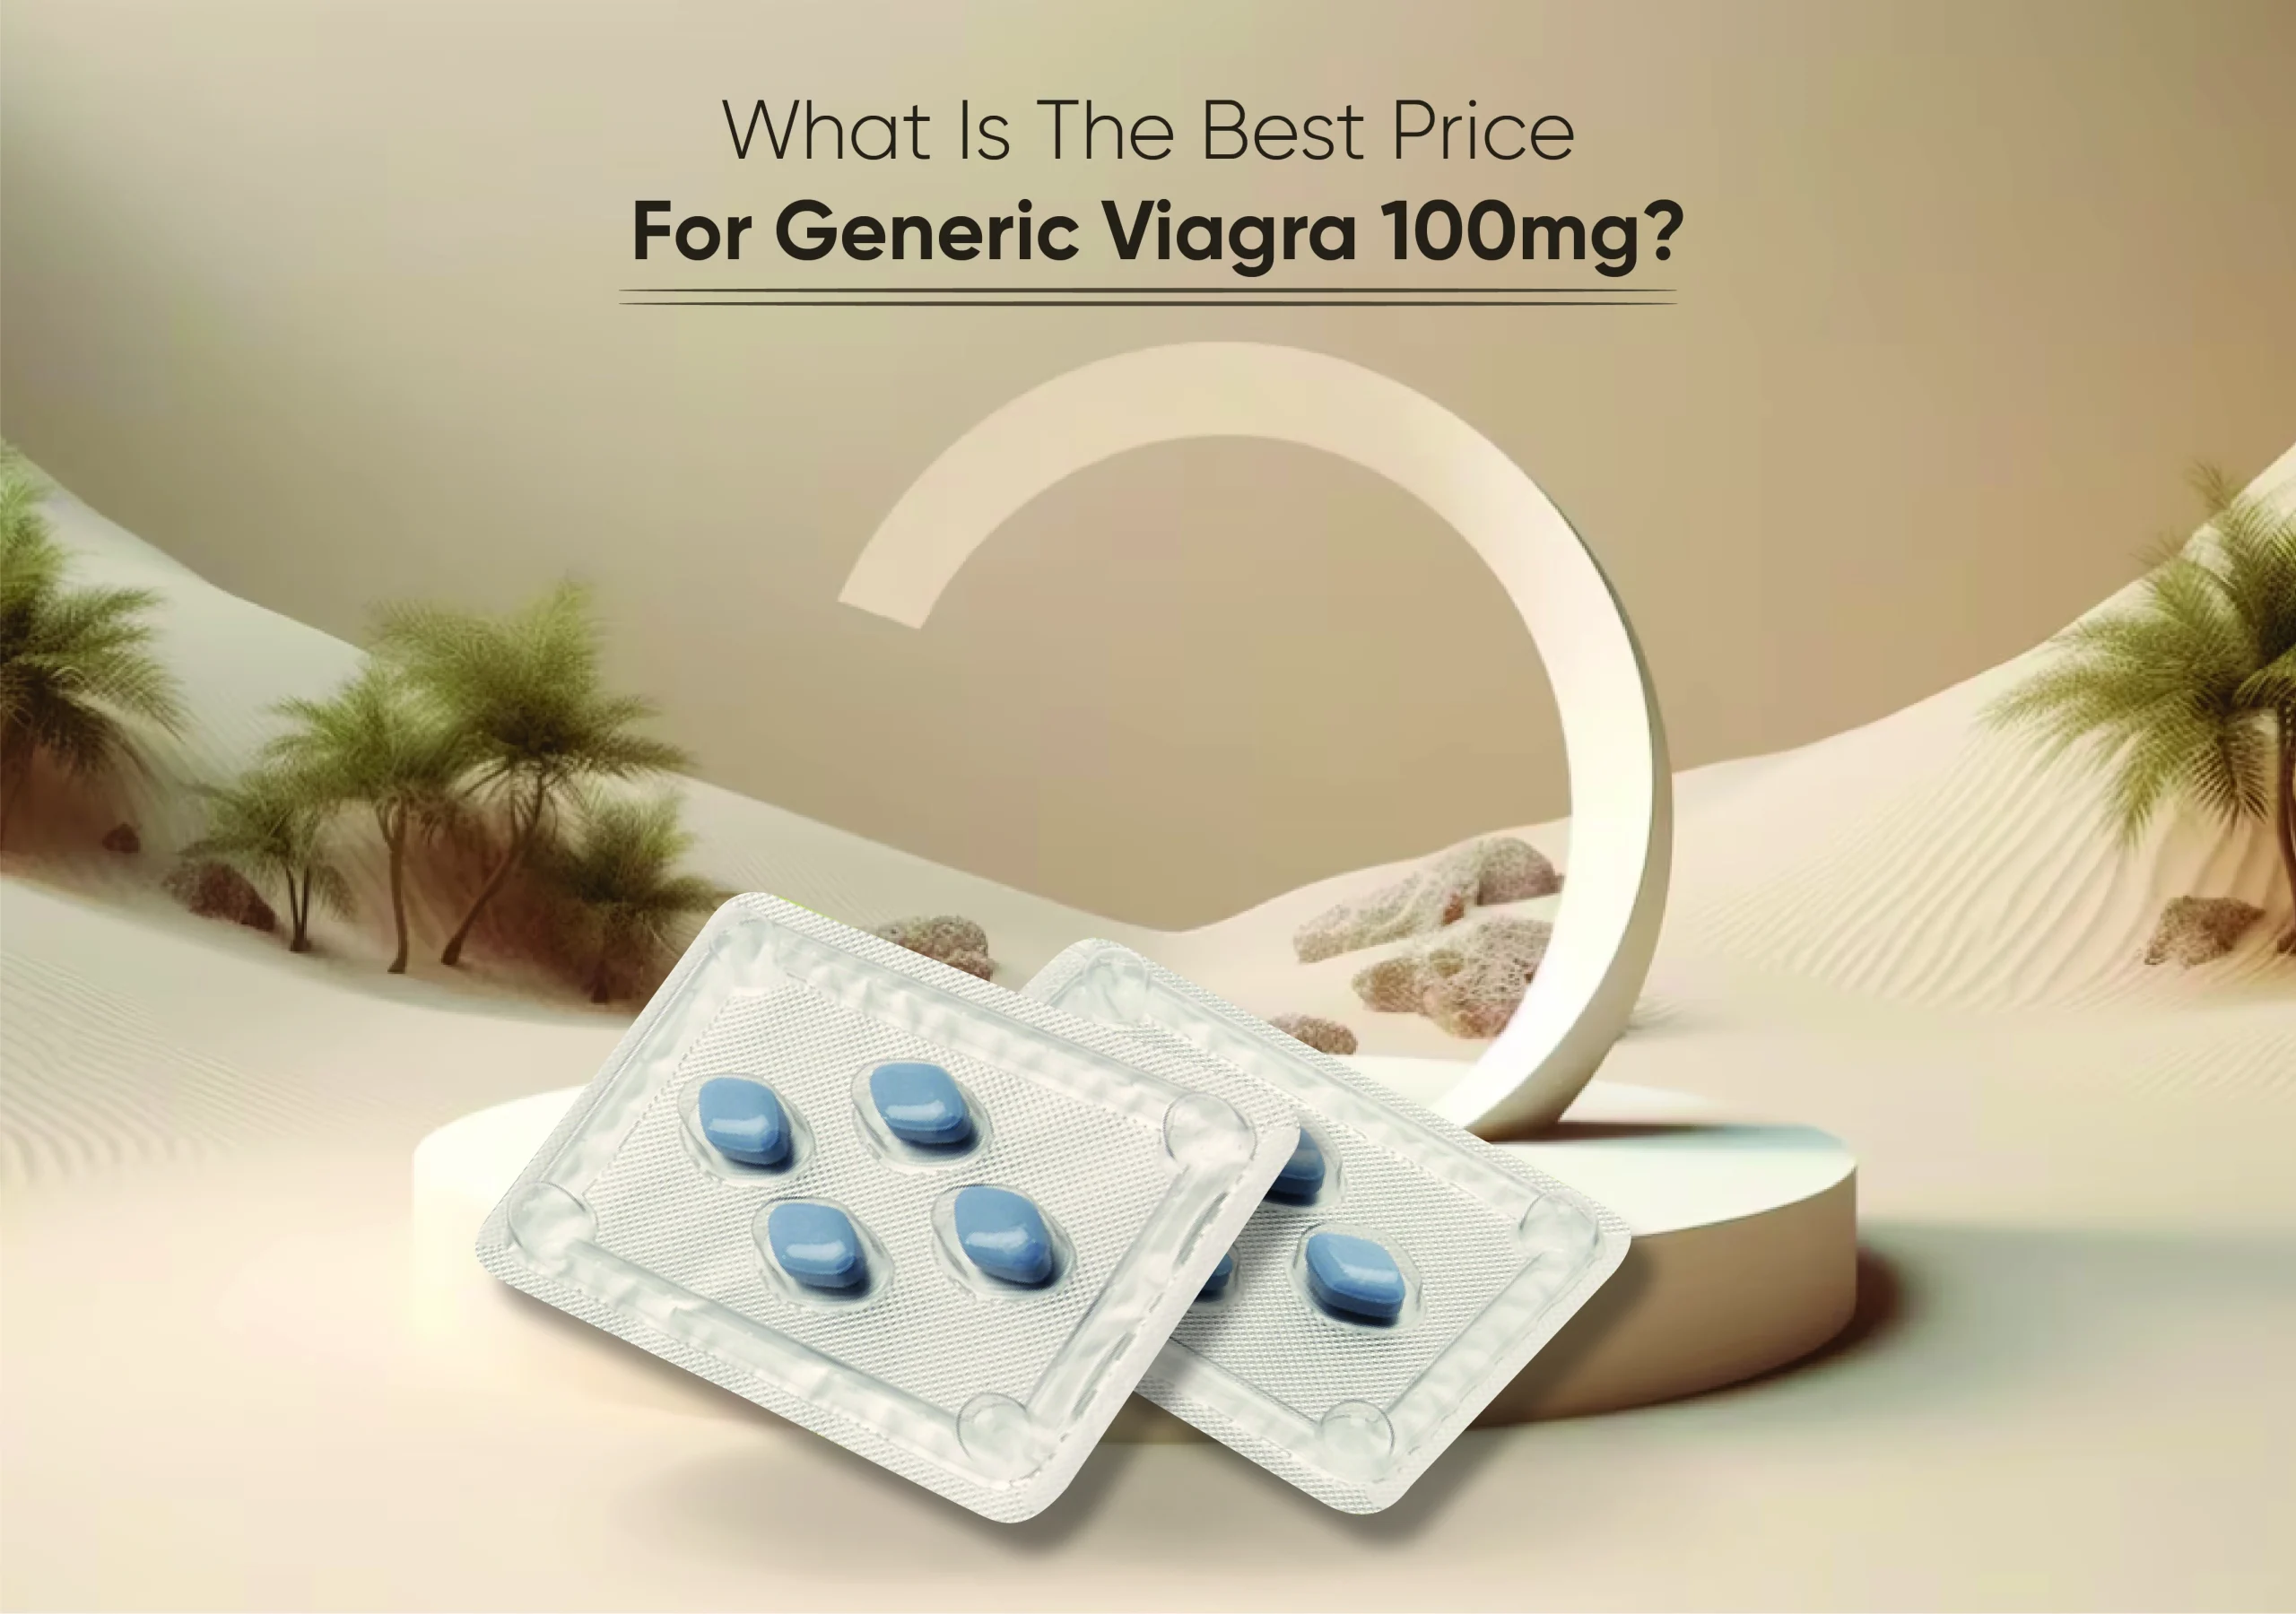 What is the best price for generic Viagra 100mg?